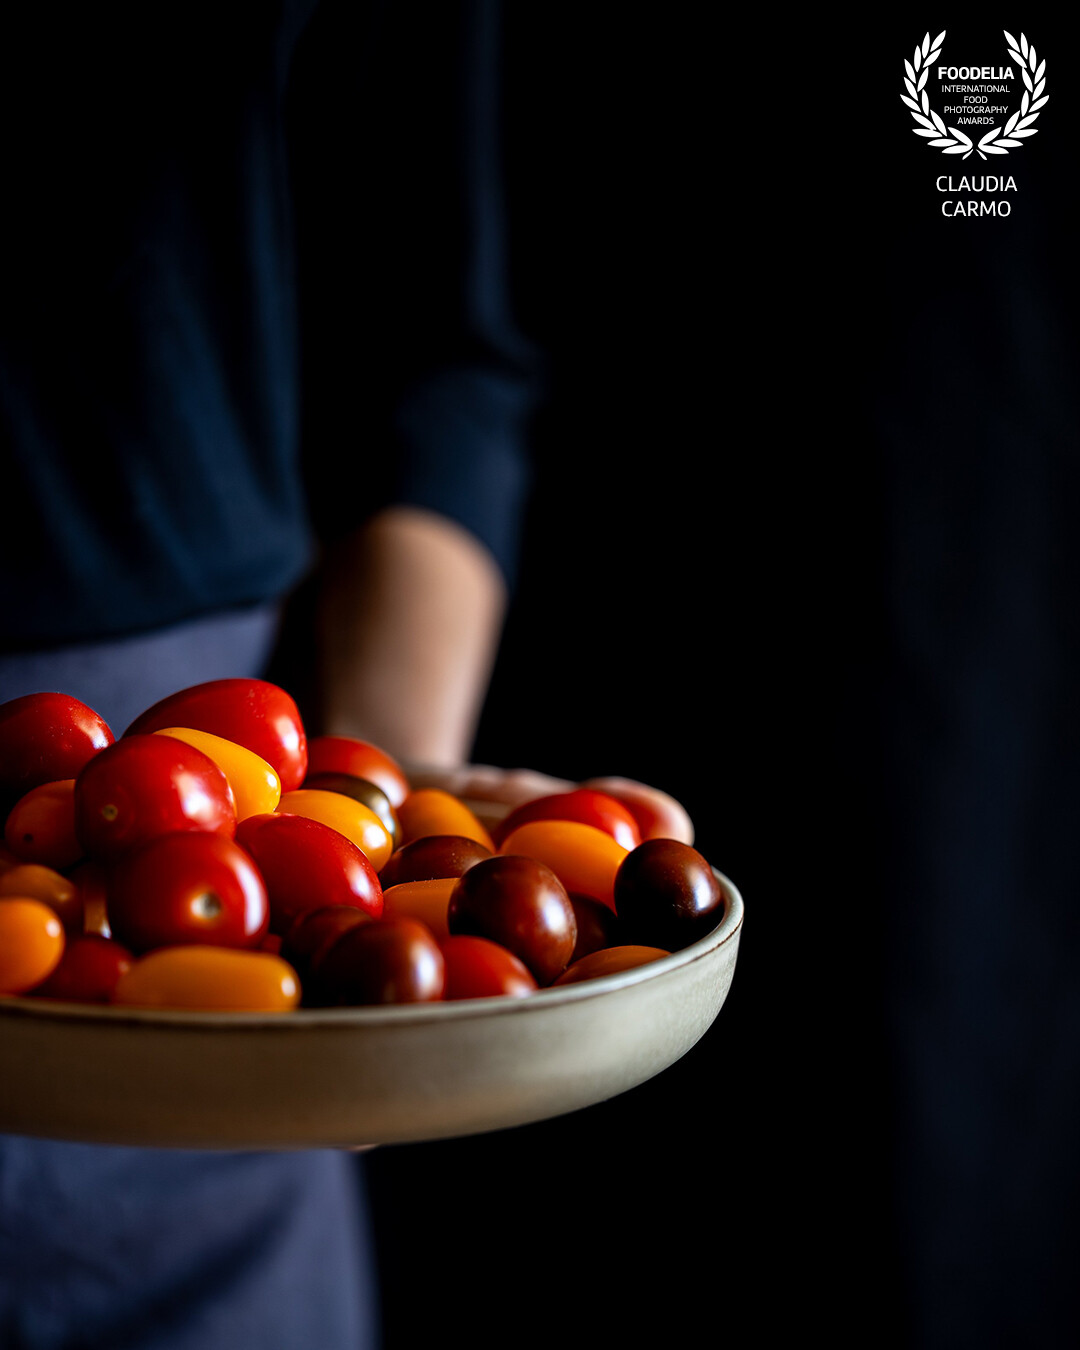 Fresh cherry tomatoes offered on a plate, photographed in natural light with a Canon 6D Mark II and a Canon 100mm Macro Lens.